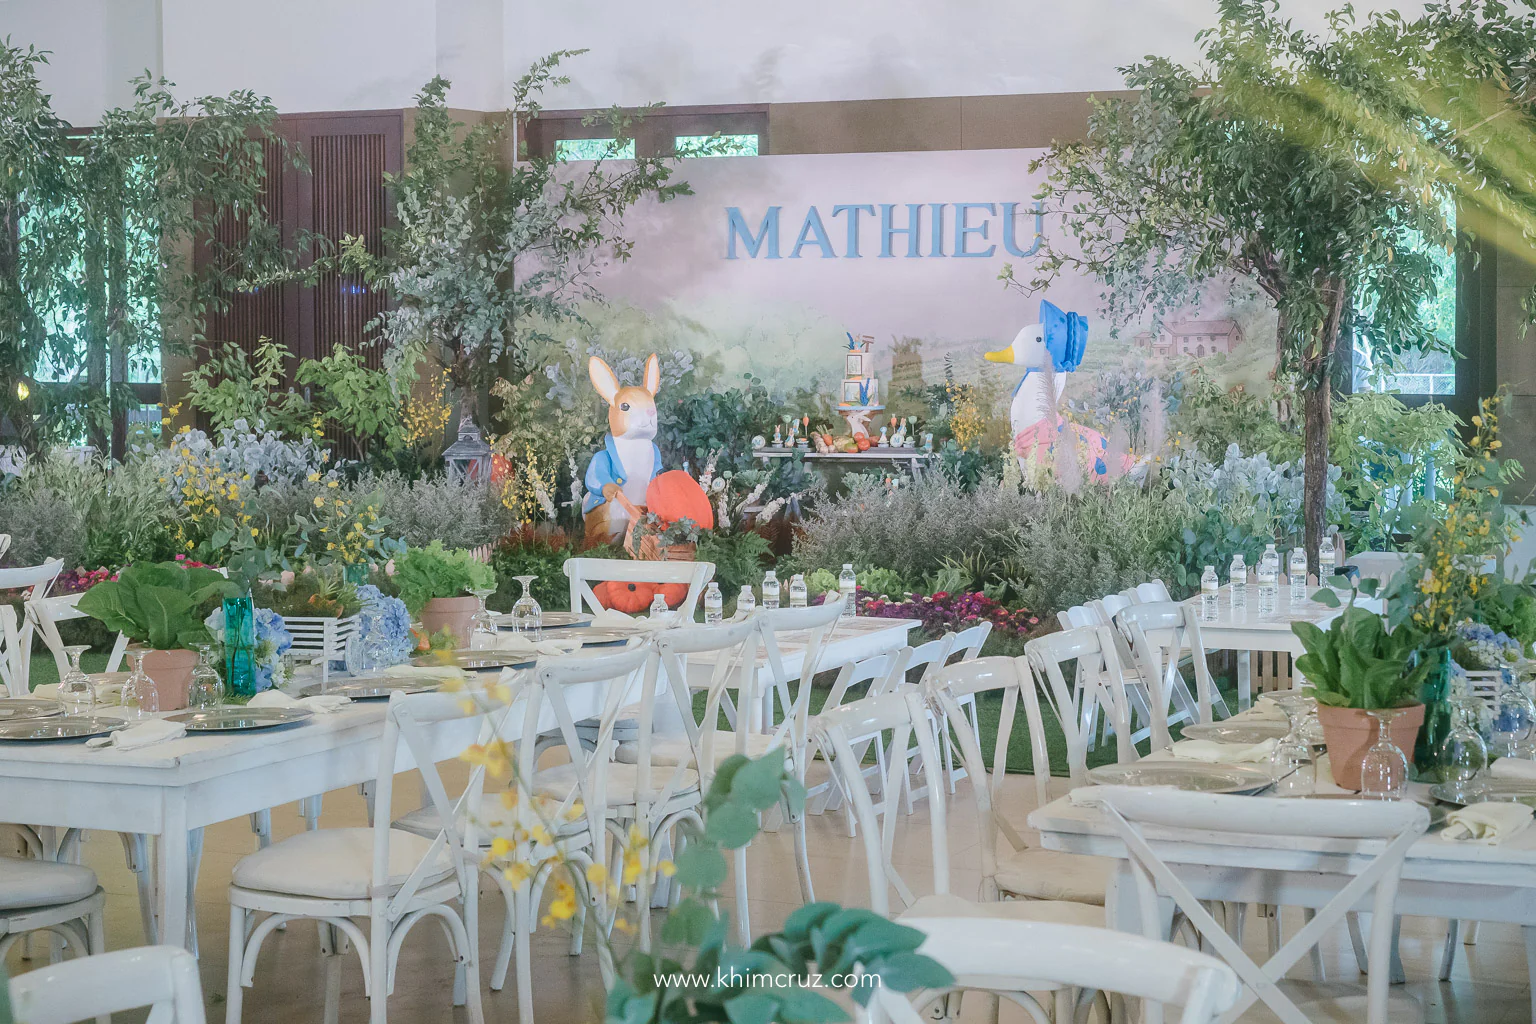 Peter Rabbit on McGregors garden with plants and vegetables themed kids birthday party designed by Khim Cruz